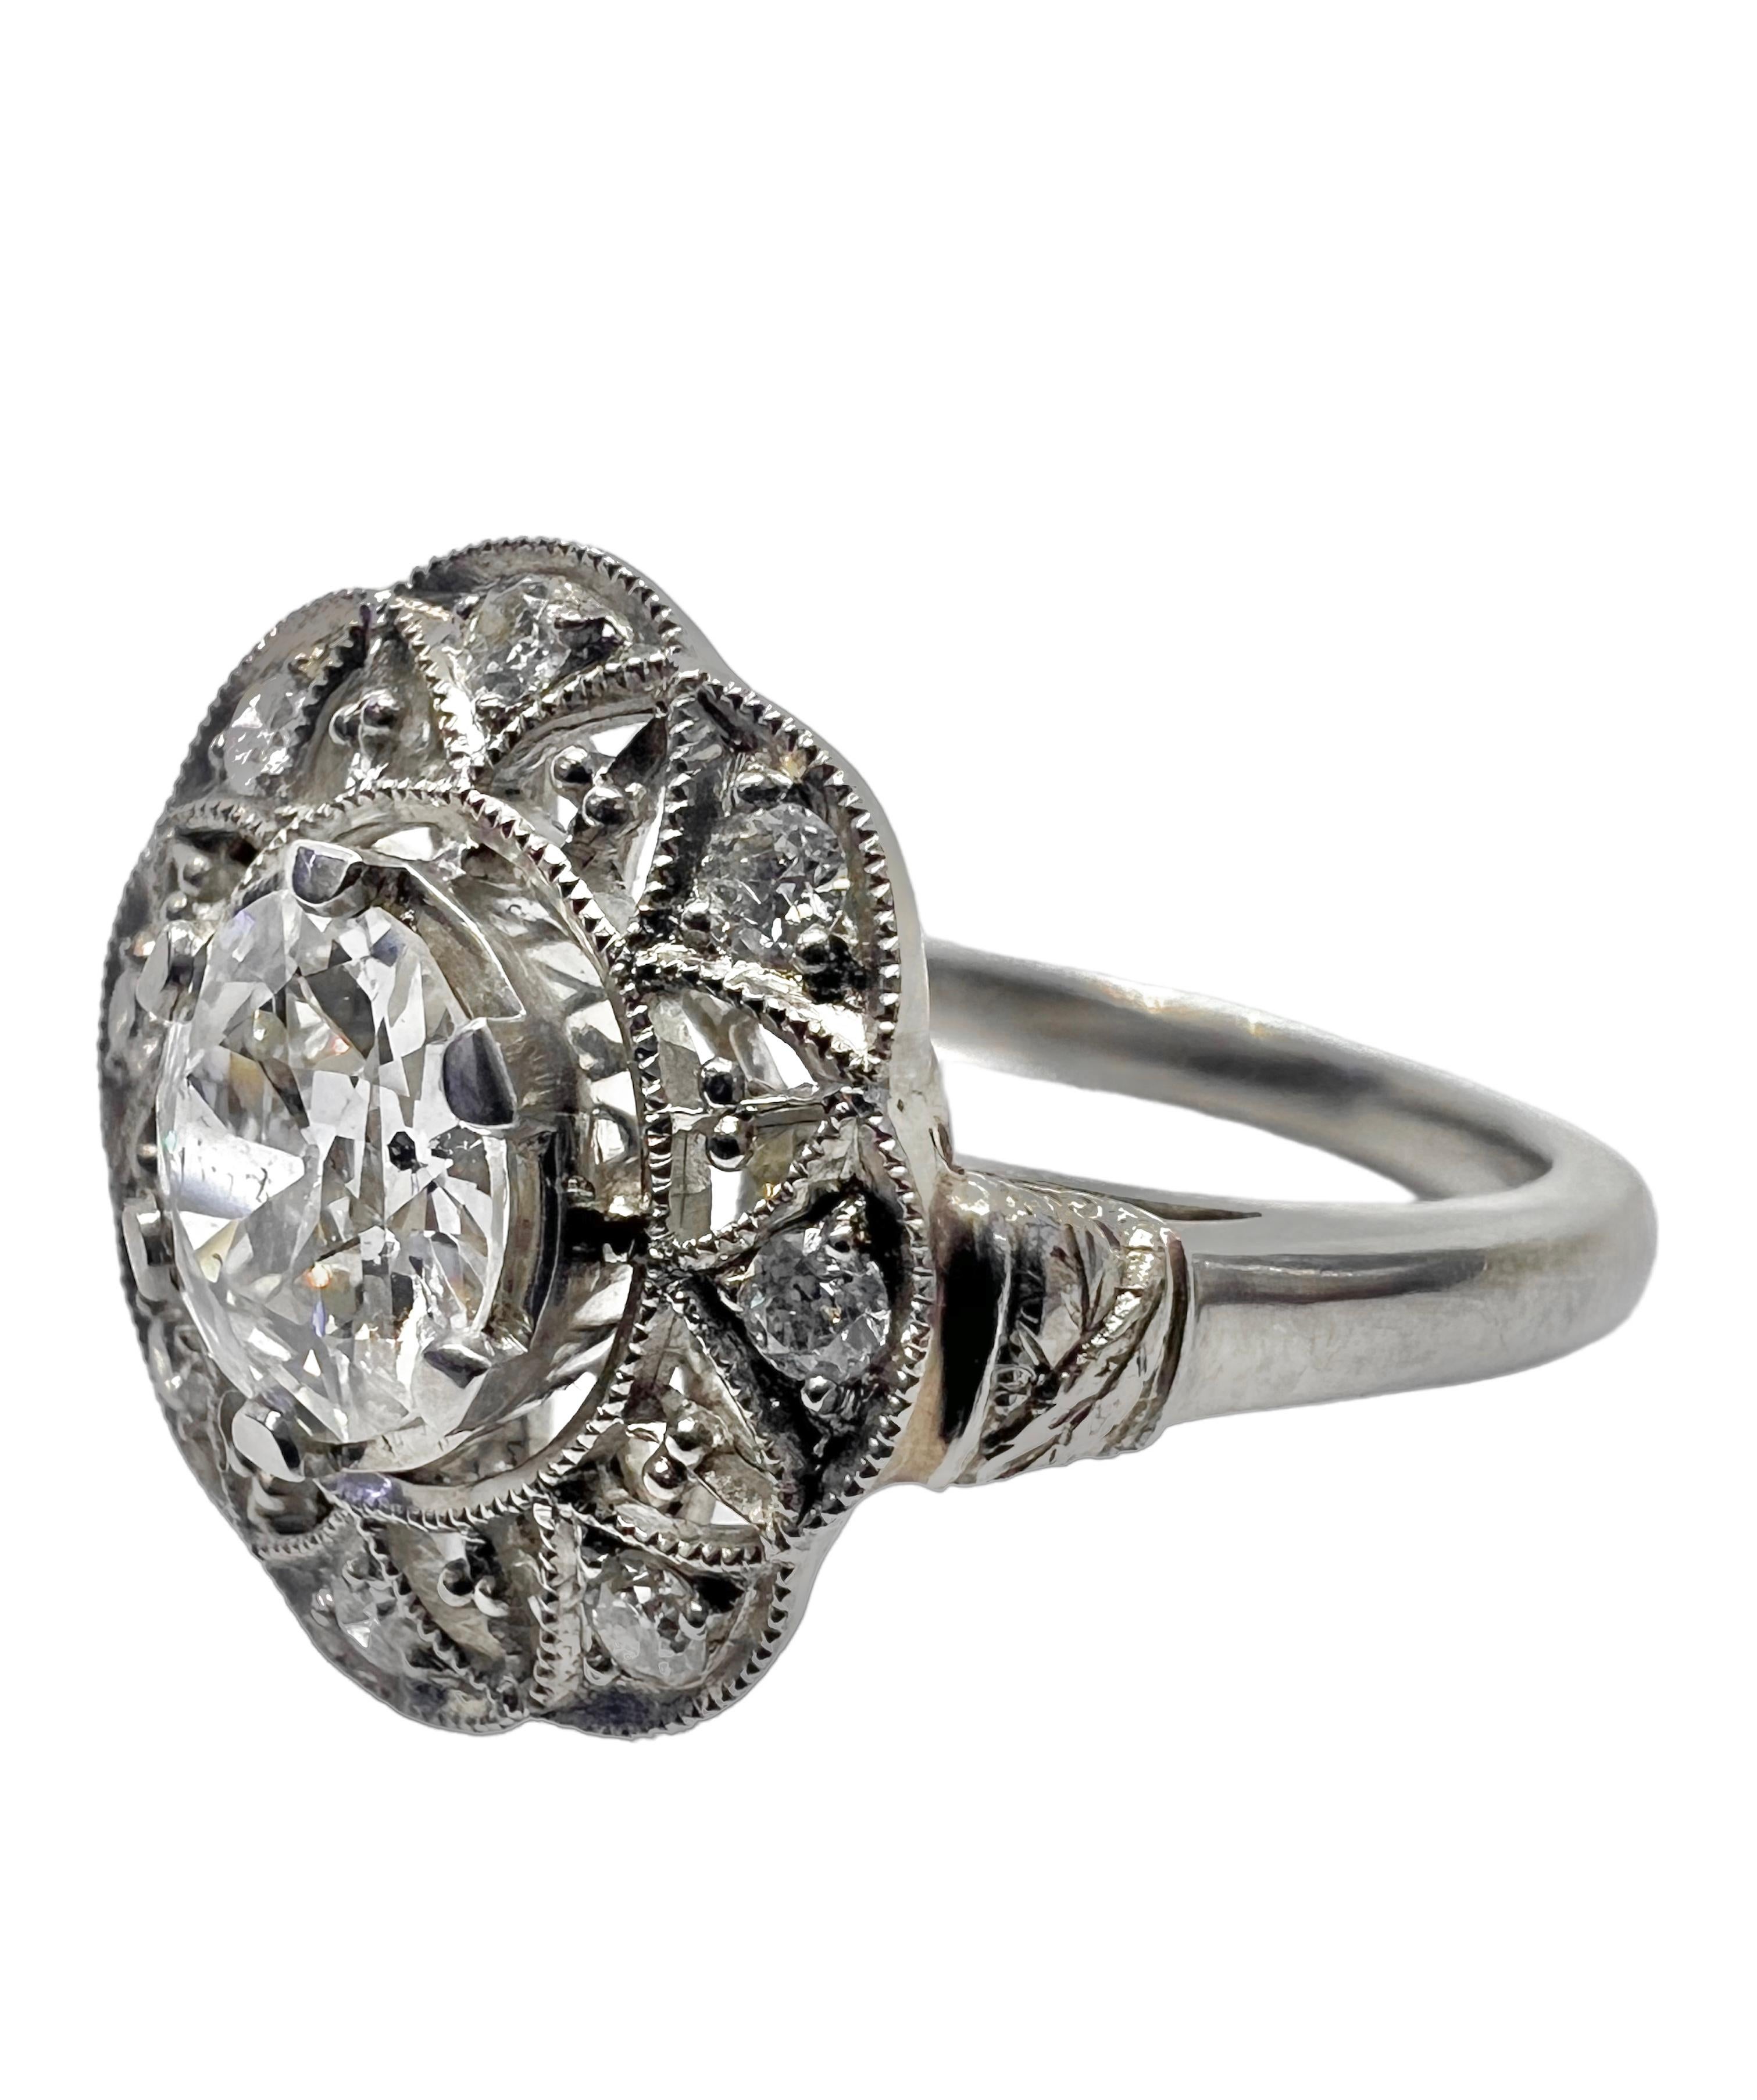 An art deco inspired platinum ring with 0.88 carat round cut center diamond and accented with .17 carat small round diamonds. 

Sophia D by Joseph Dardashti LTD has been known worldwide for 35 years and are inspired by classic Art Deco design that